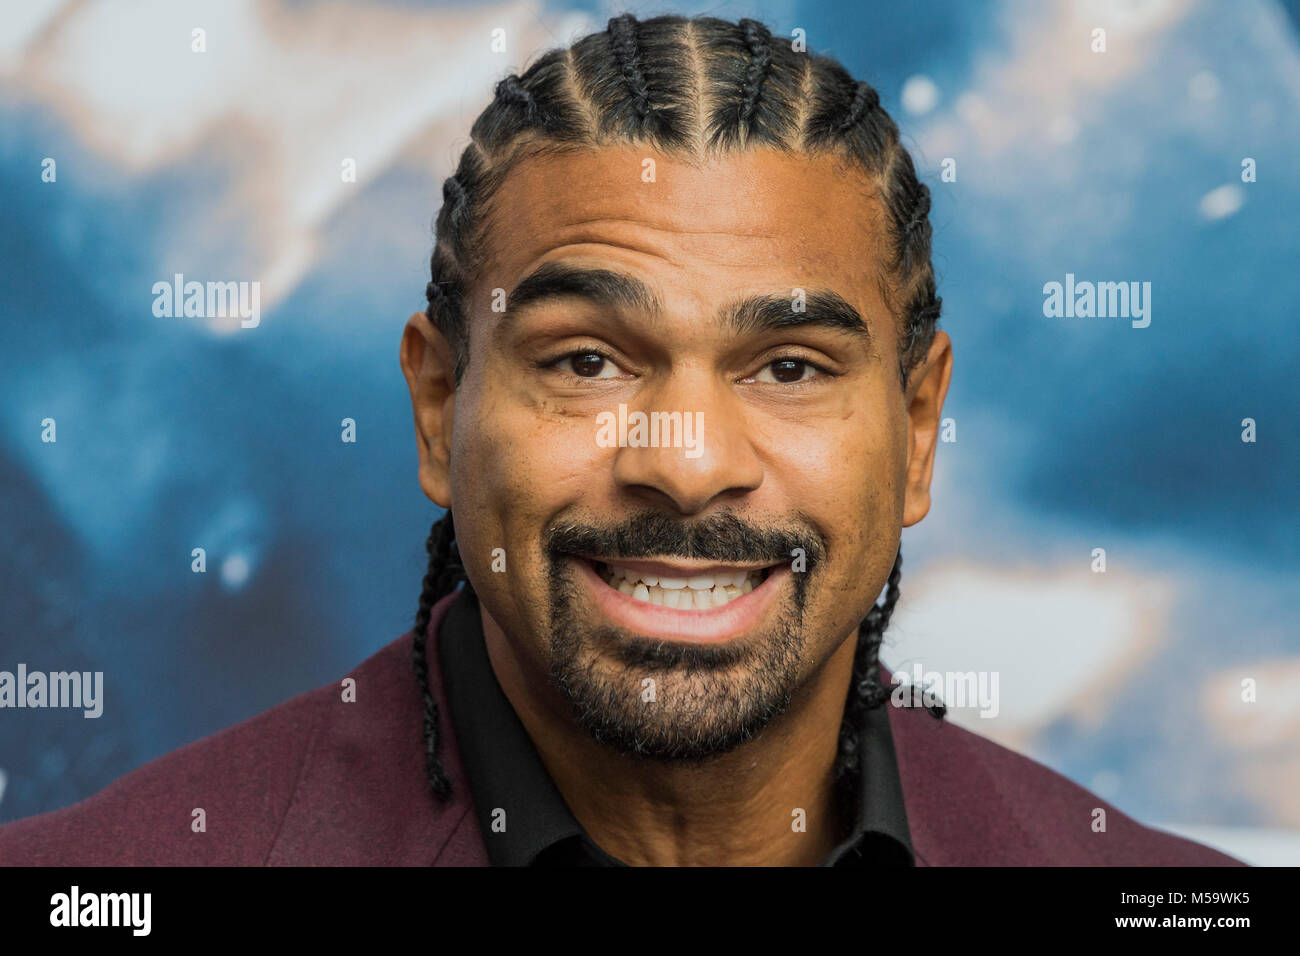 London, UK. 21st February, 2018. Tony Bellew and David Haye (pictured) meet at a press conference at the Park Plaza Westminster Bridge. Organised by Matchroom Boxing and Hayemaker Ringstar ahead of the rescheduled rematch between the boxers at The O2 in London on May 5. London 21 February 2018. Credit: Guy Bell/Alamy Live News Stock Photo